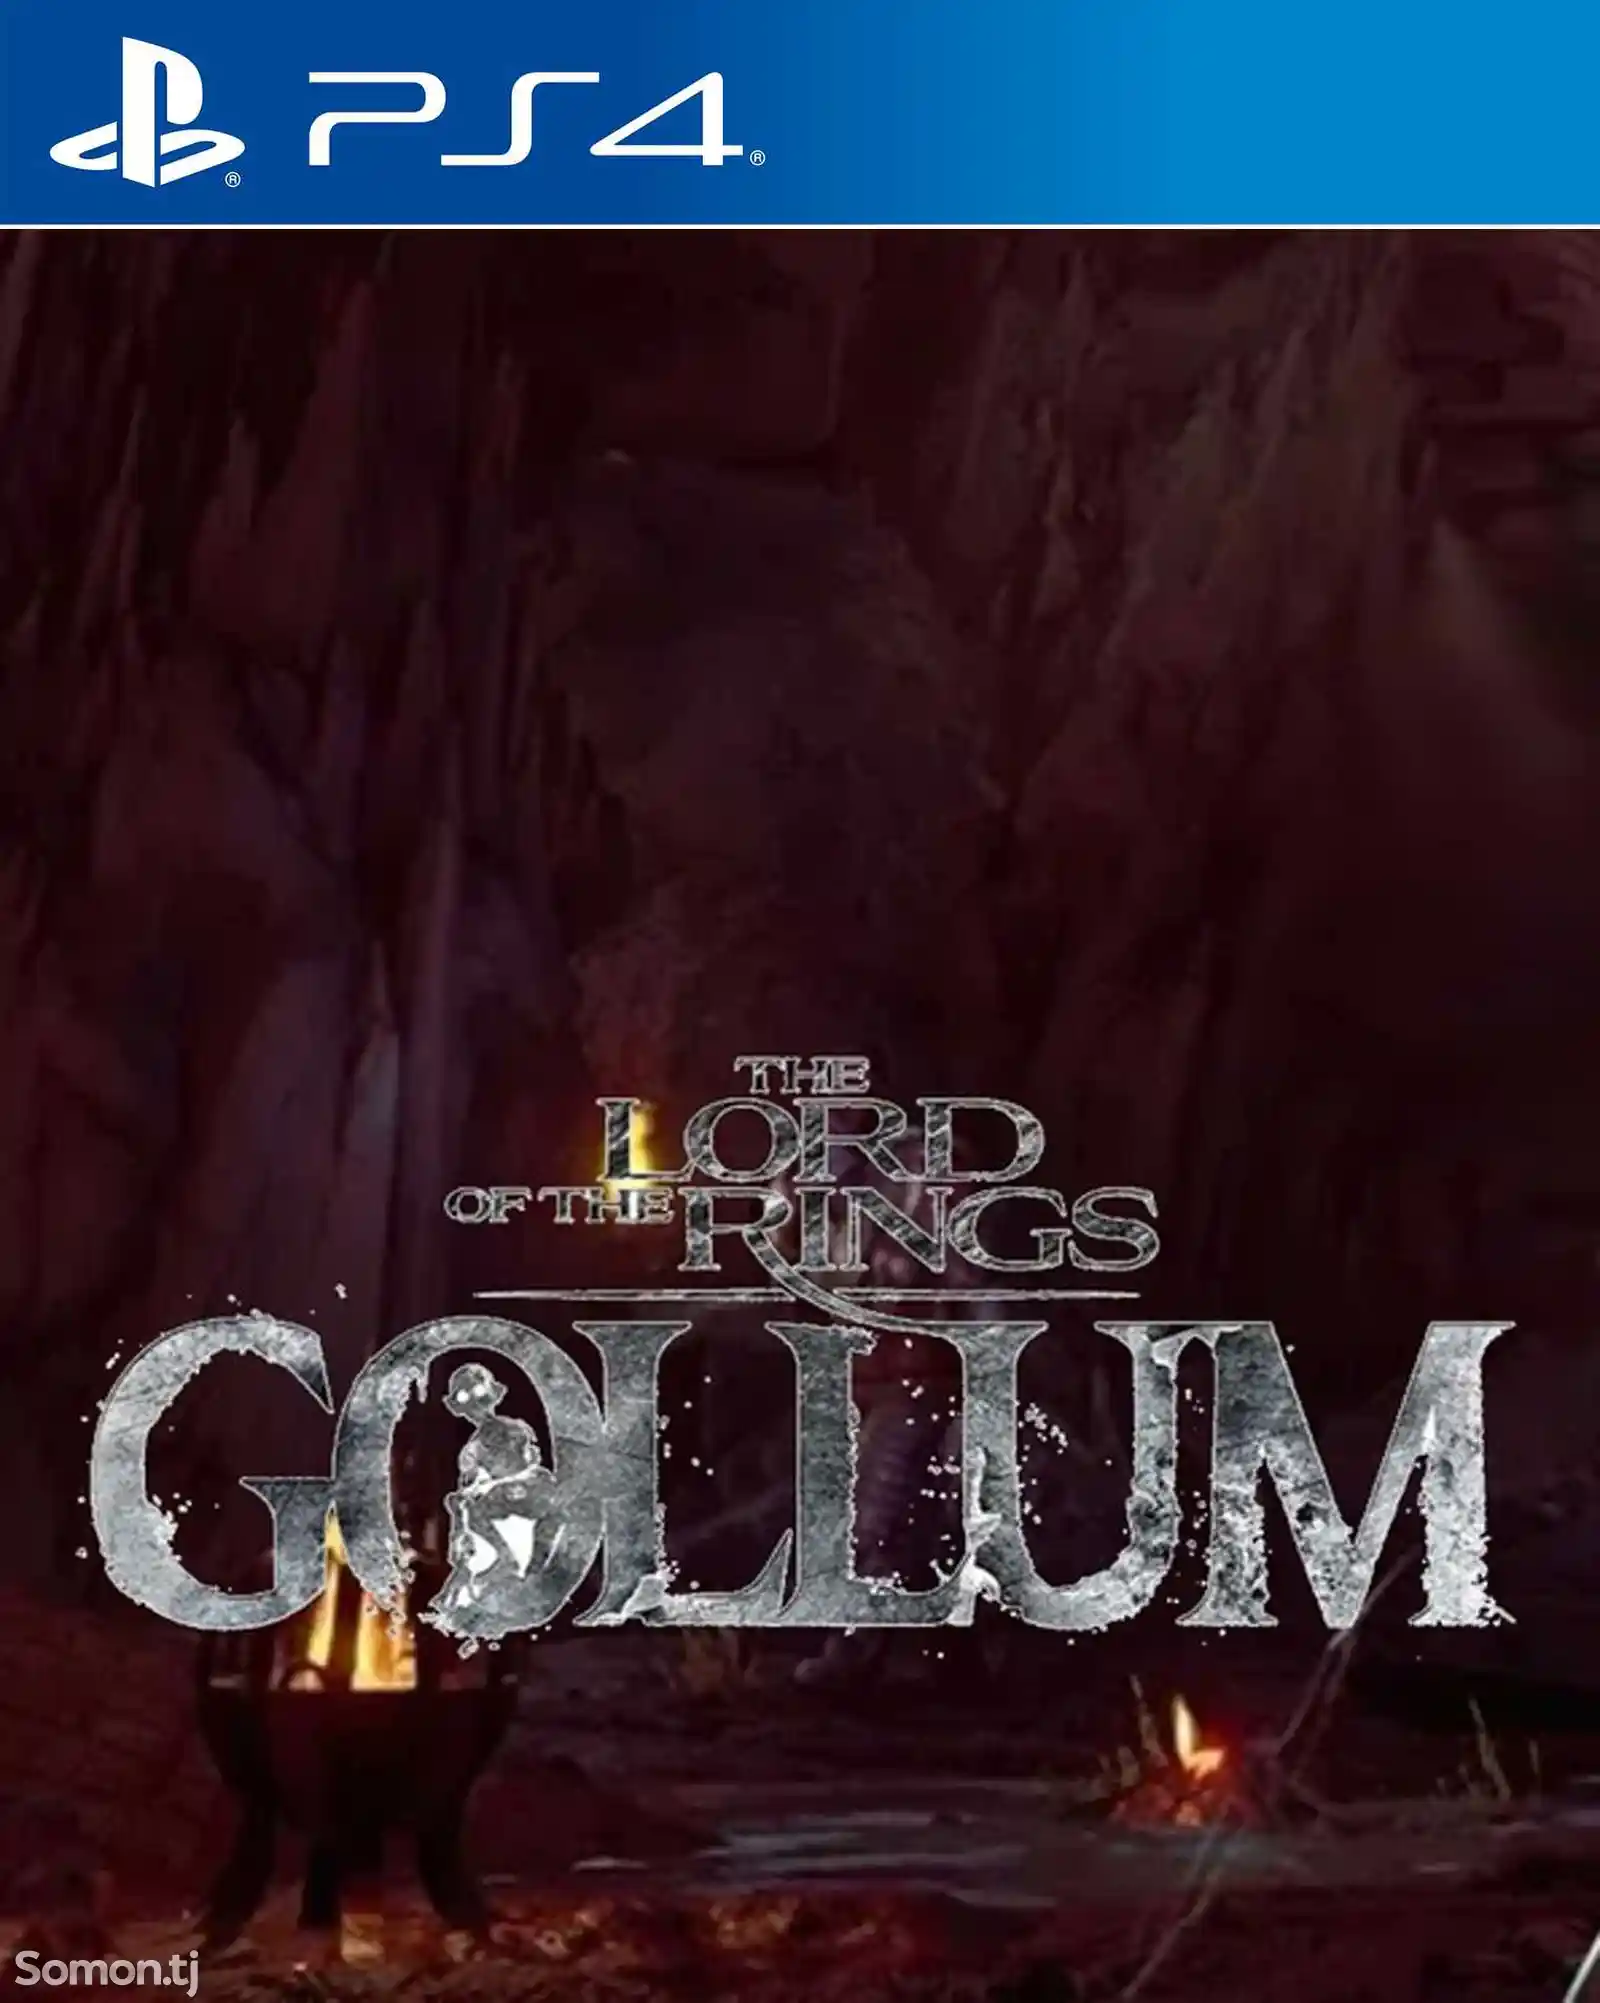 Игра The lord of the rings gollum для PS-4 / 5.05 / 6.72 / 7.02 / 7.55 / 9.00 /-1